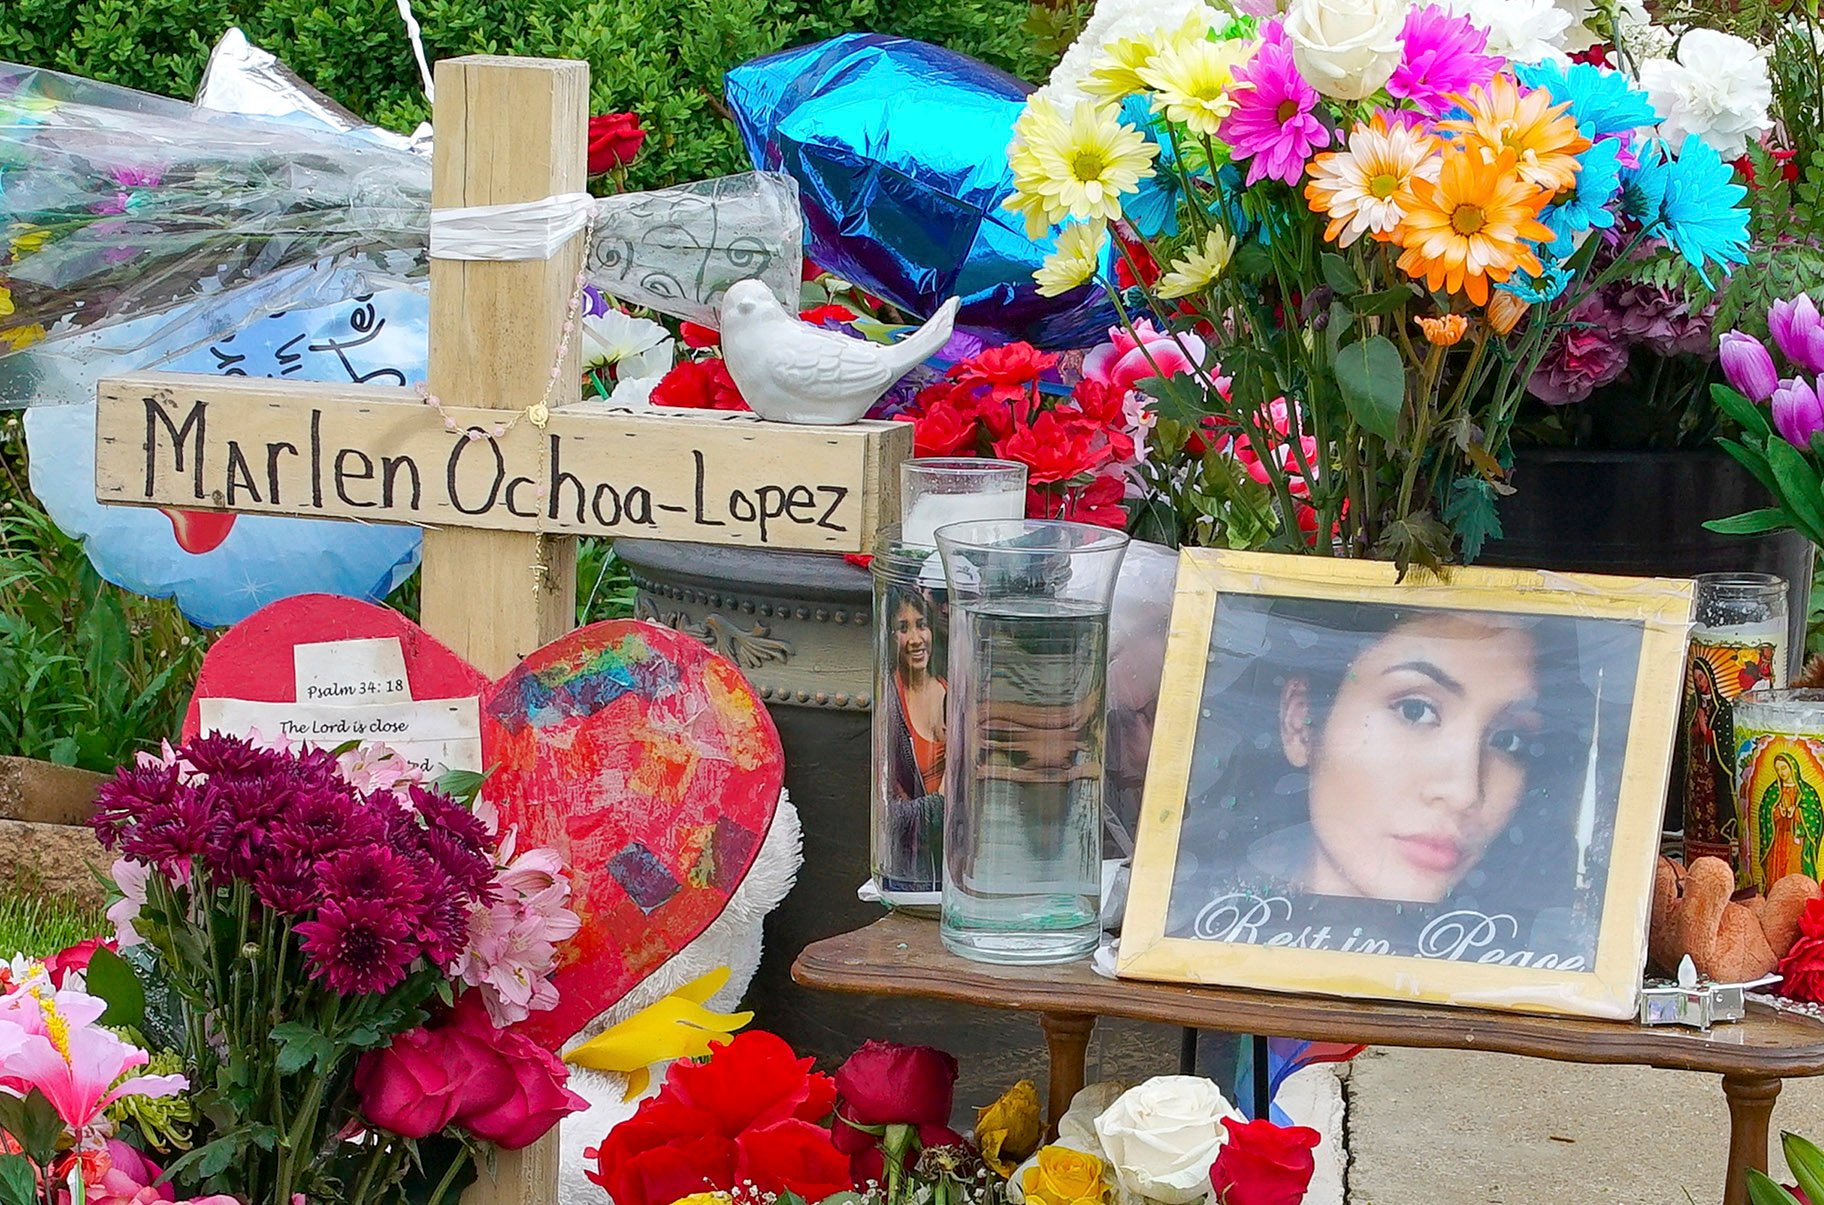 A memorial of flowers, balloons, a cross and photo of Marlen Ochoa-Lopez are displayed on the lawn, Friday, May 17, 2019 in Chicago, outside the home where Ochoa-Lopez was murdered last month. (AP Photo / Teresa Crawford)